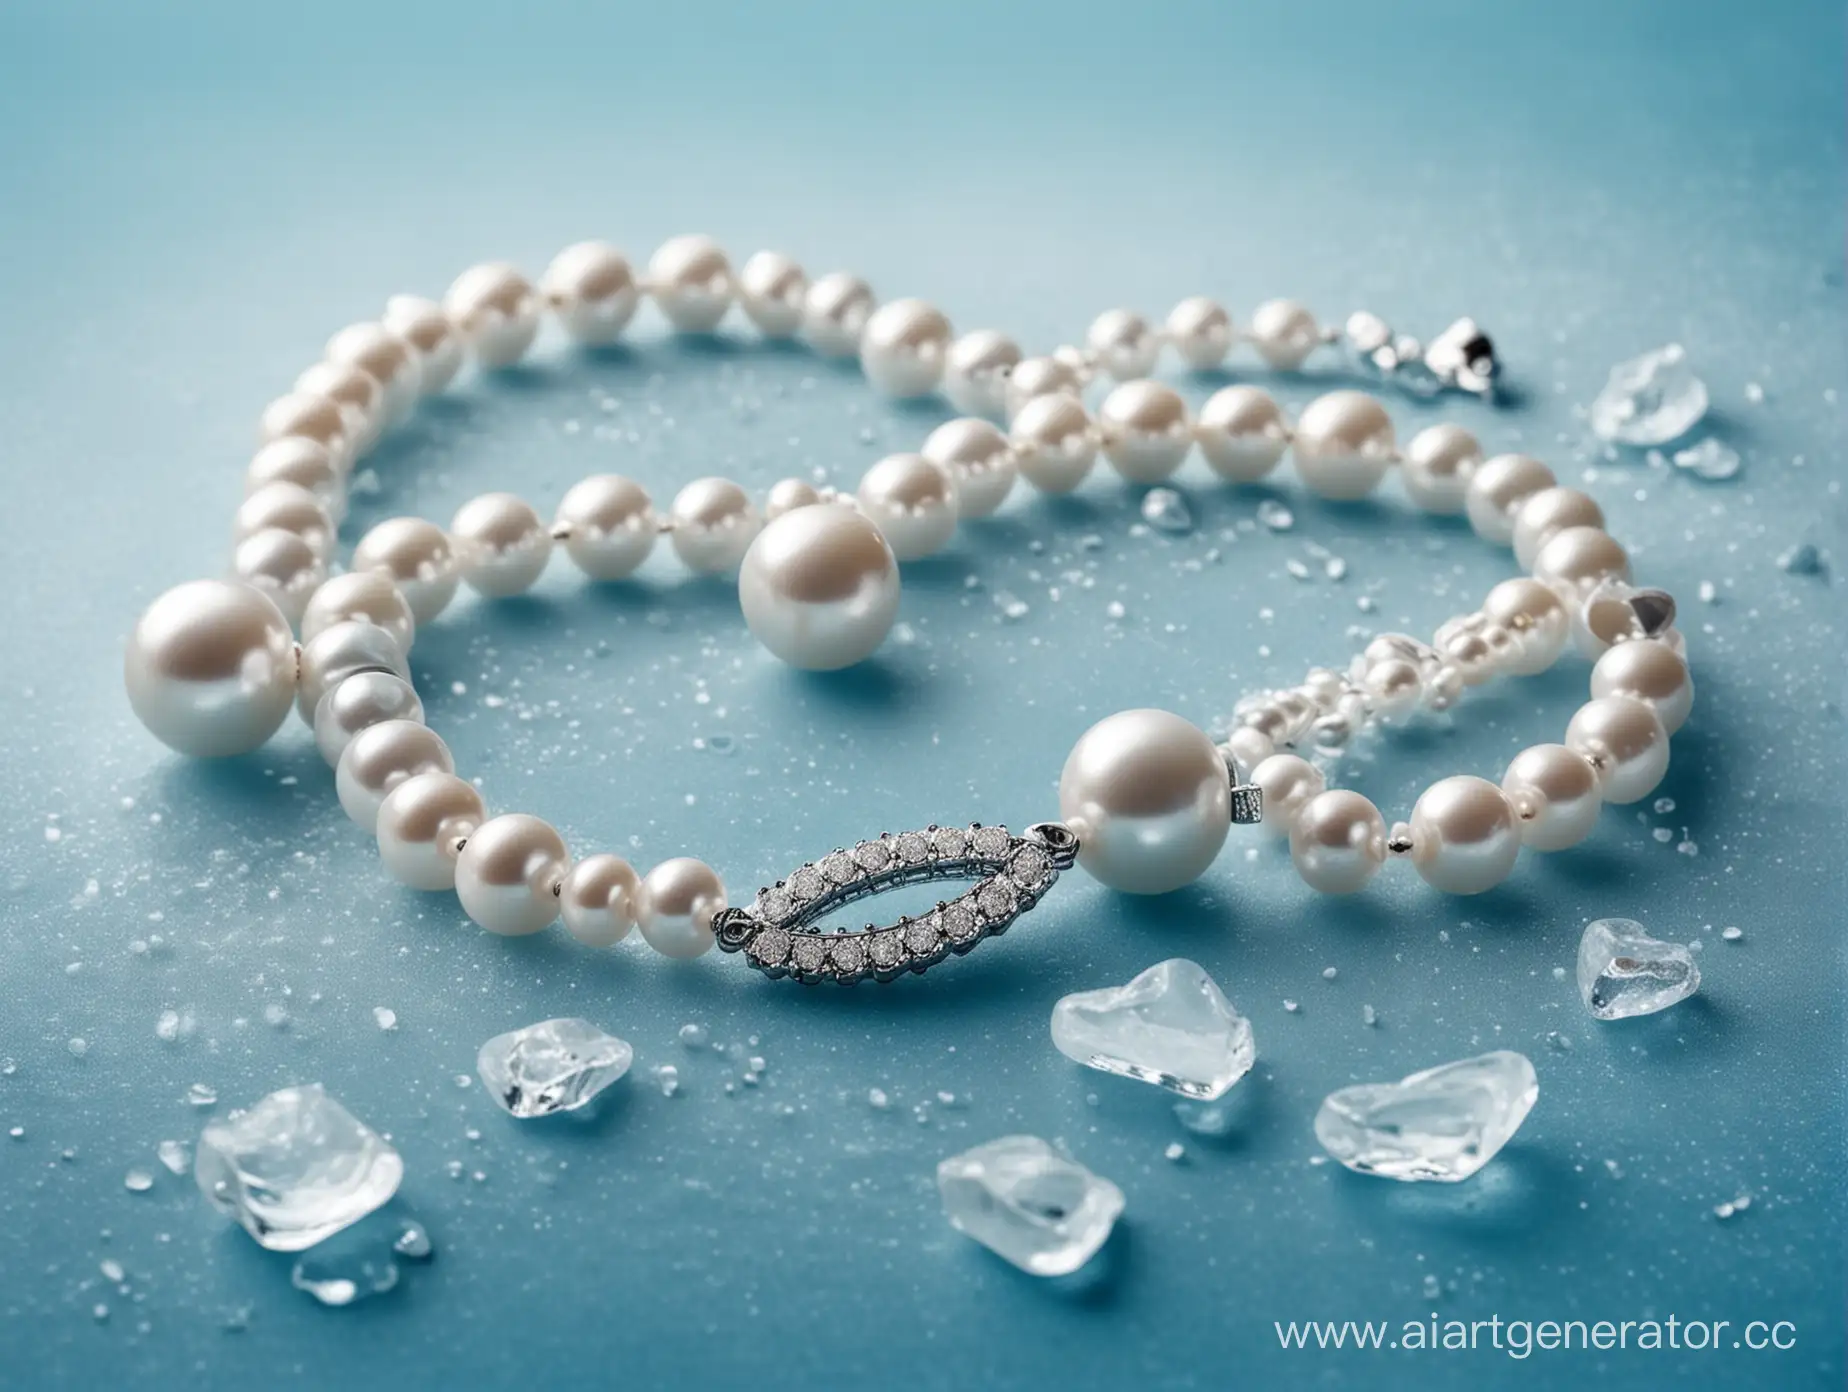 Elegant-Pearl-Jewelry-Displayed-on-Ice-Against-a-Serene-Blue-Background